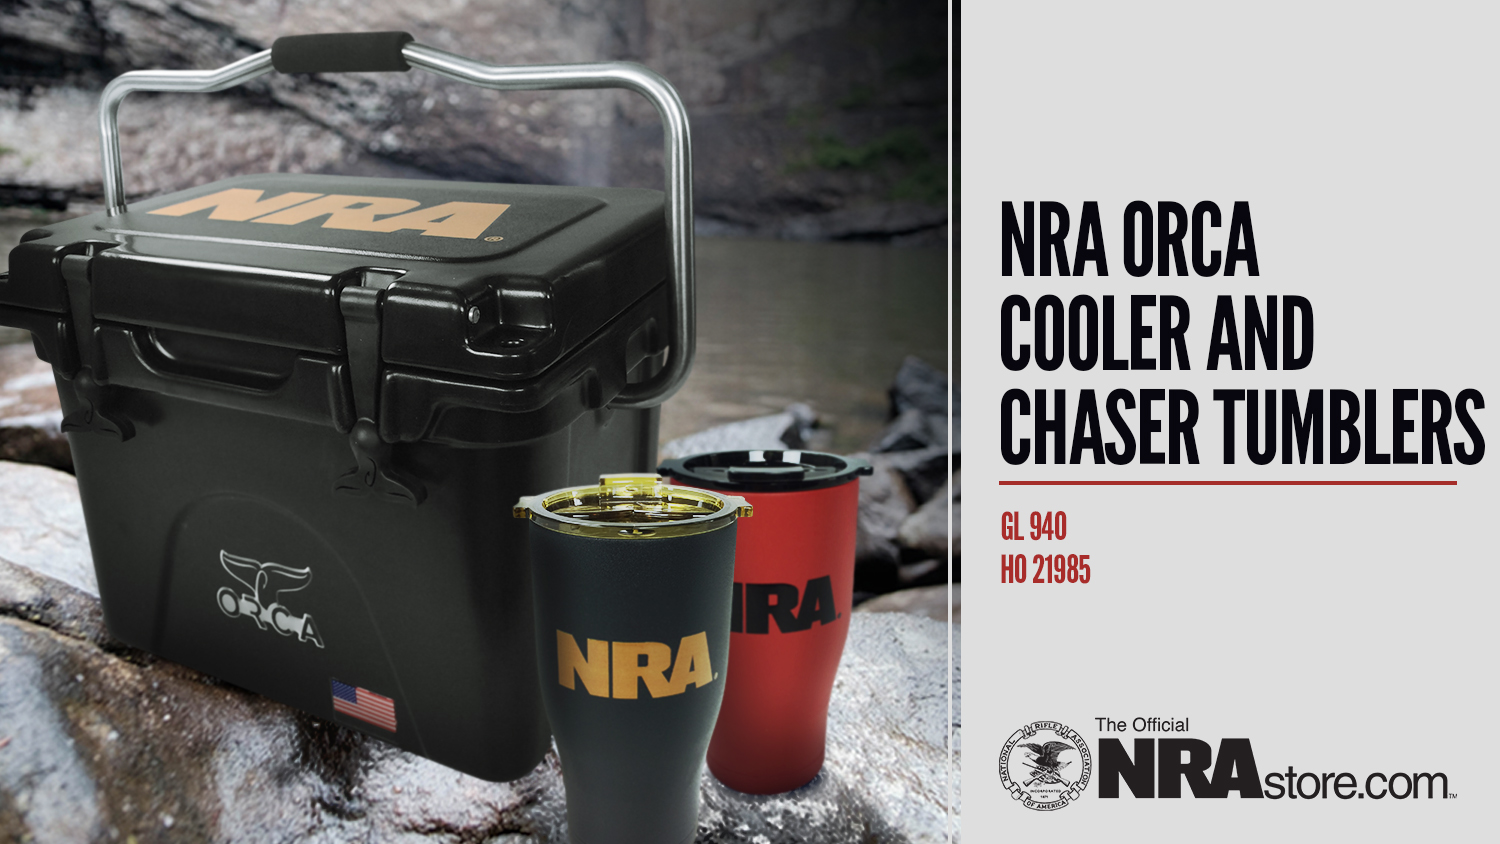  NRAstore Product Highlight: NRA Orca Cooler and Chaser Tumblers